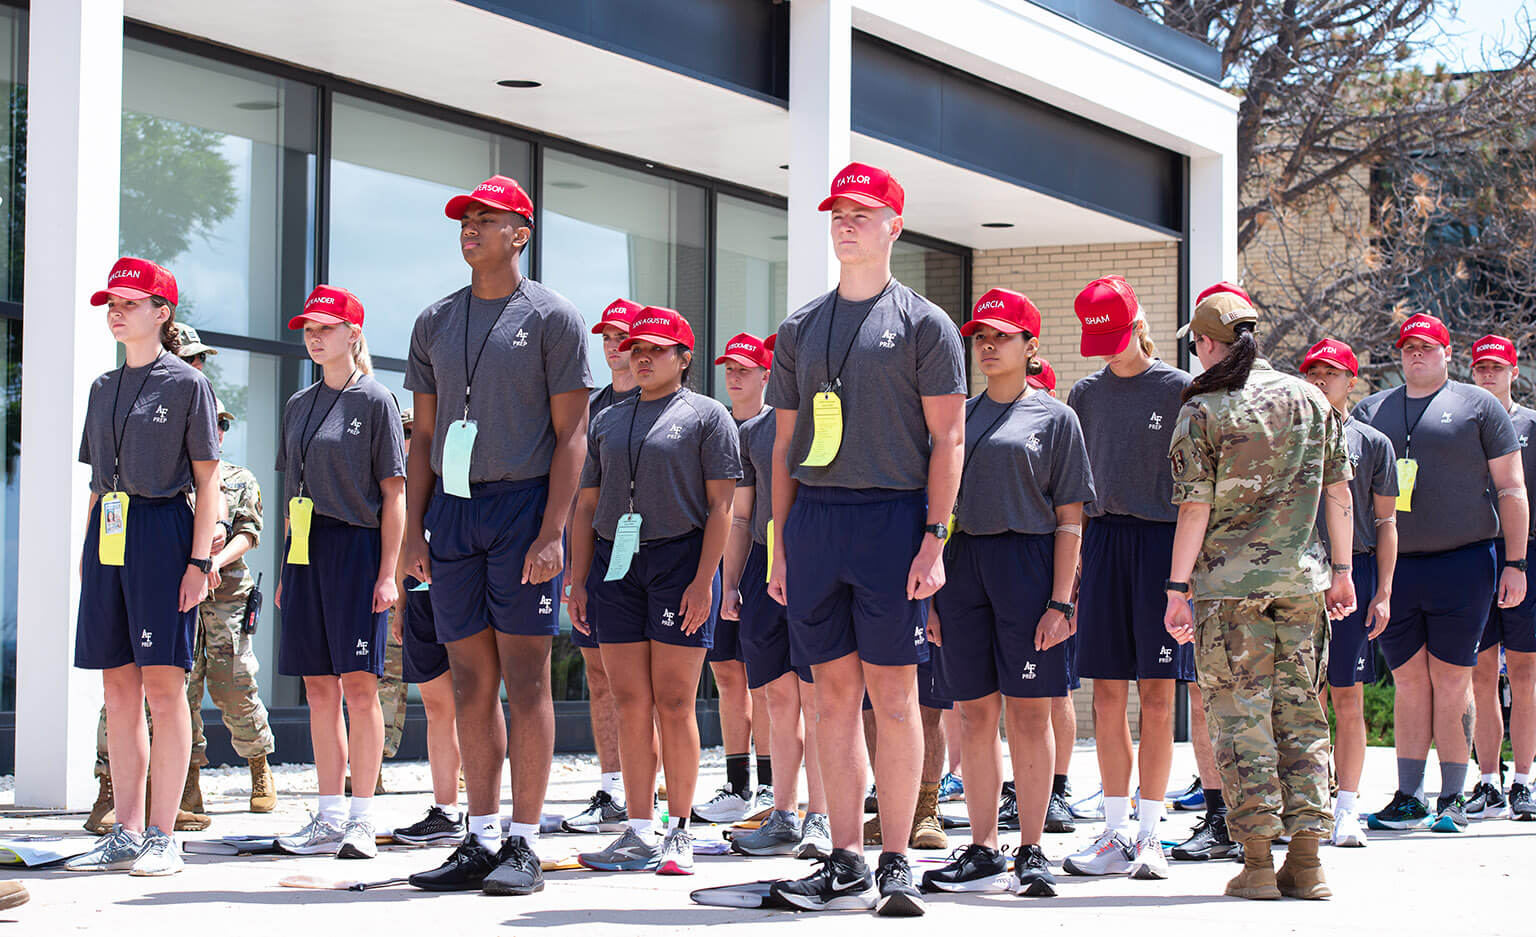 Cadet candidates arrive for Prep School in-processing